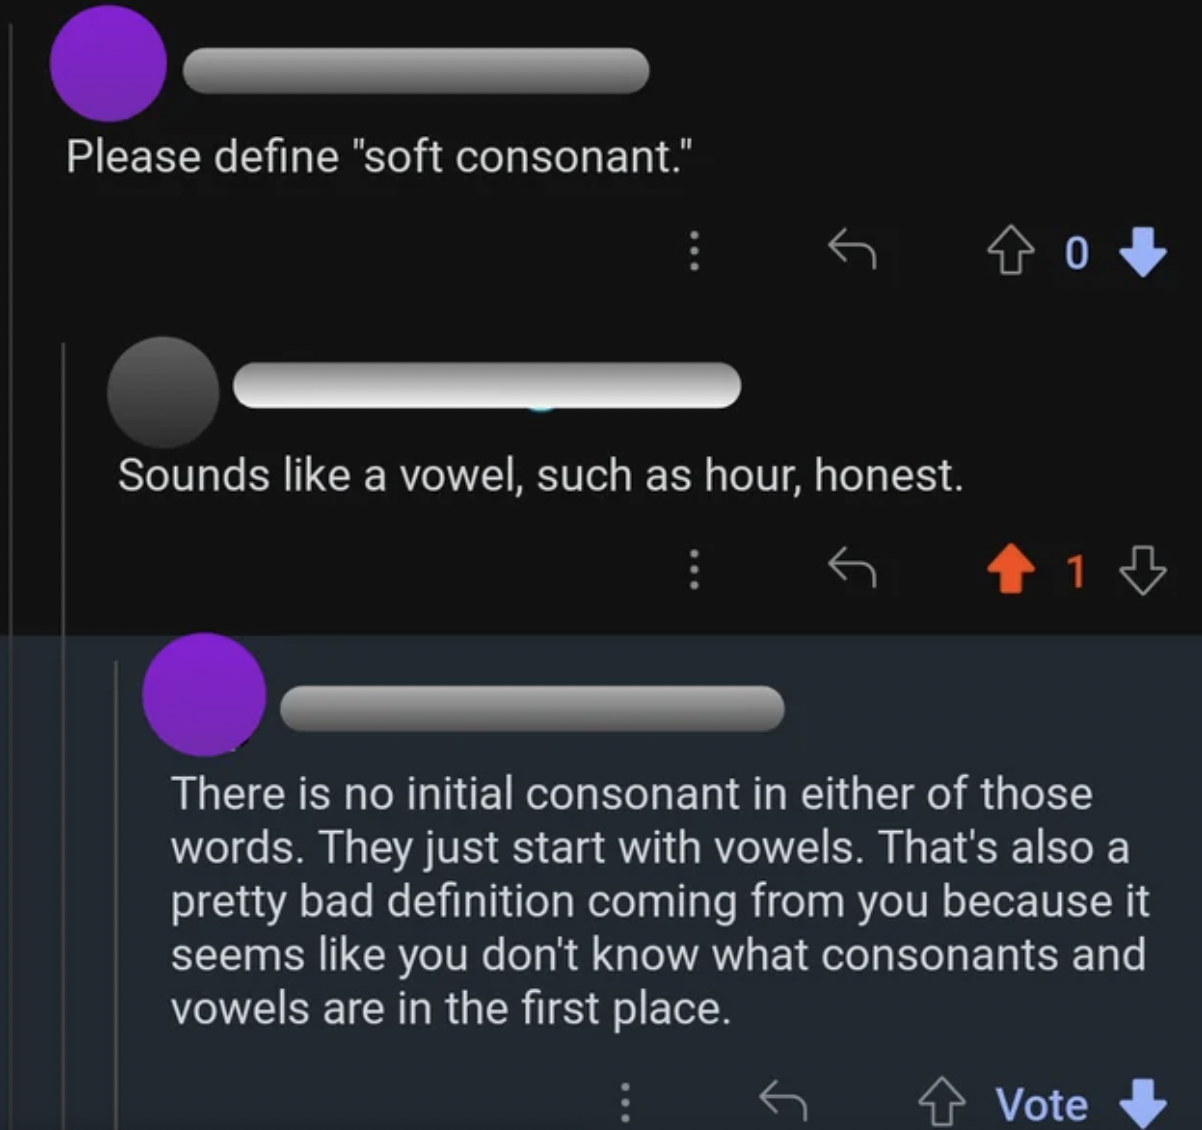 screenshot - Please define "soft consonant." Sounds a vowel, such as hour, honest. 40 13 There is no initial consonant in either of those words. They just start with vowels. That's also a pretty bad definition coming from you because it seems you don't kn